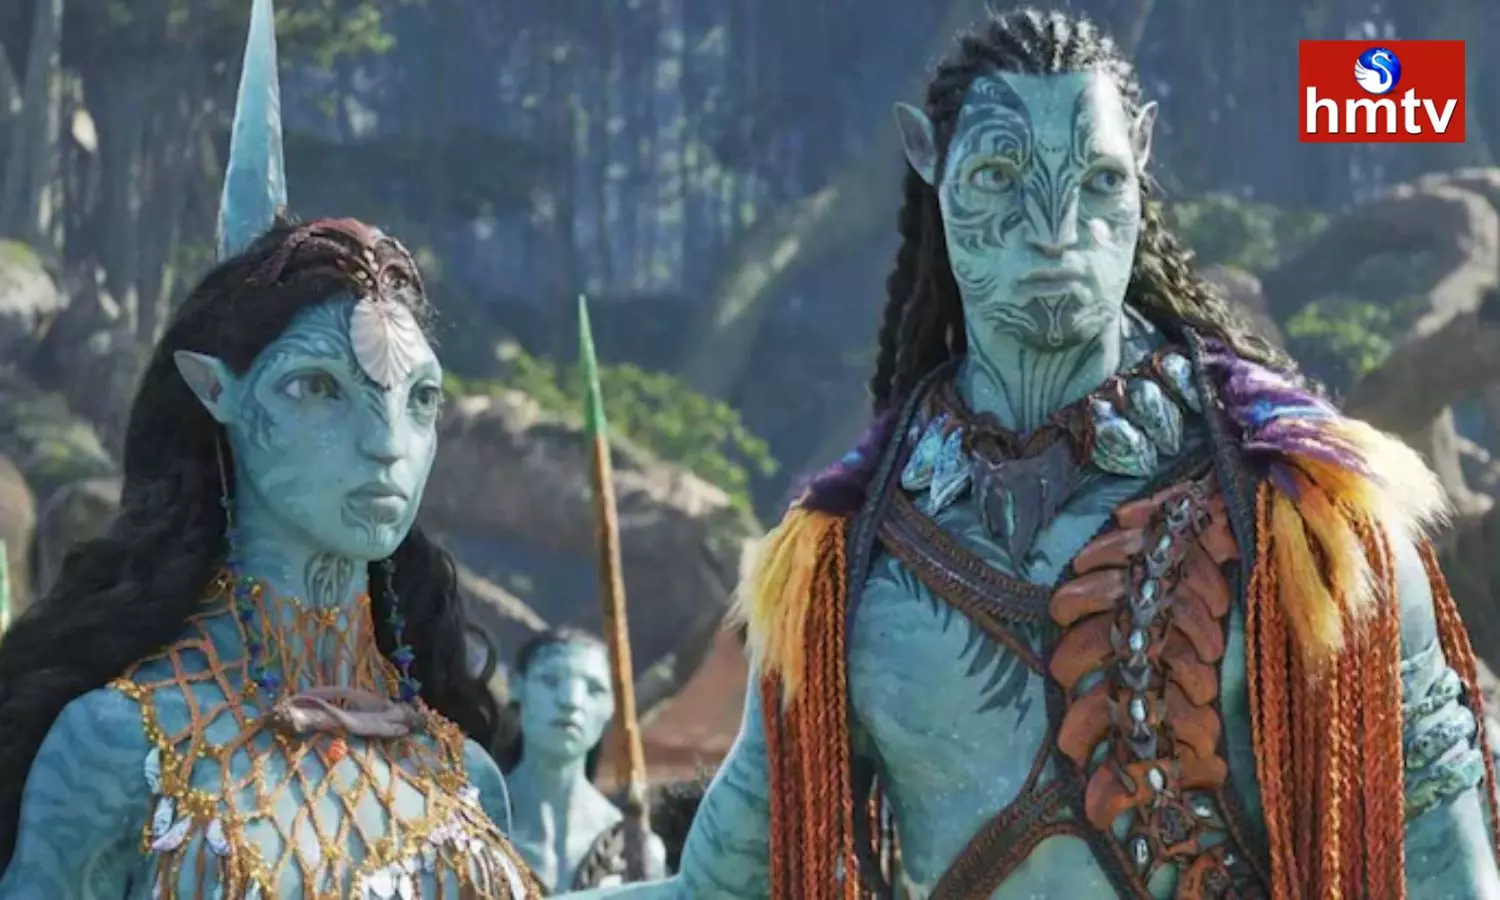 Avatar 2 Collections Increased On Second Day Than The First Day